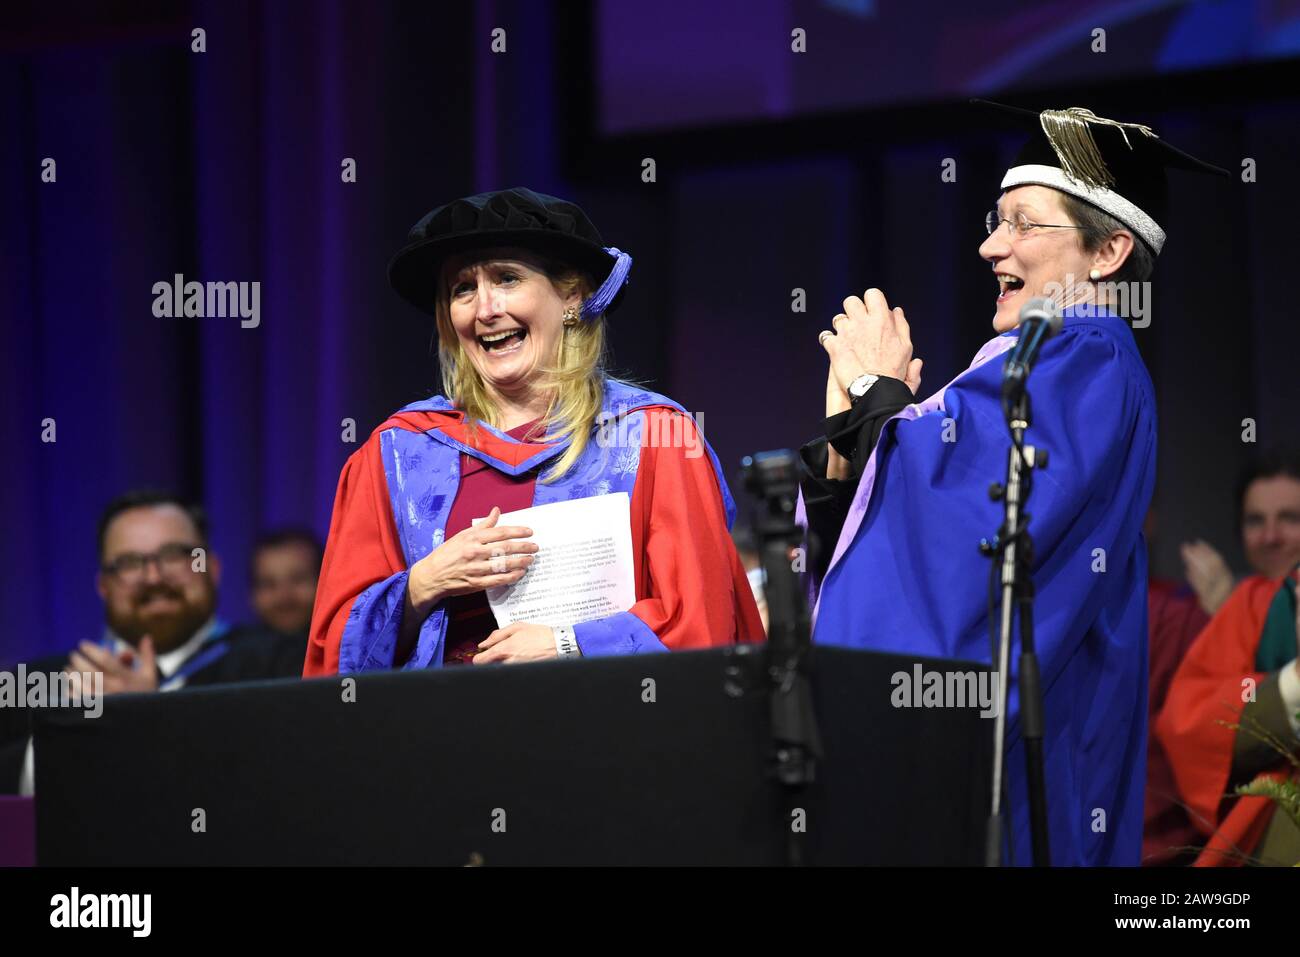 Brighton UK 7th February 2020 - Childrens author Cressida Cowell (left) known for her series of books 'How to Train Your Dragon receives an Honorary Doctorate of Arts at the University of Brighton Graduation Ceremony from Vice-Chancellor Prof Debra Humphris this afternoon: Credit Simon Dack / Alamy Live News Stock Photo